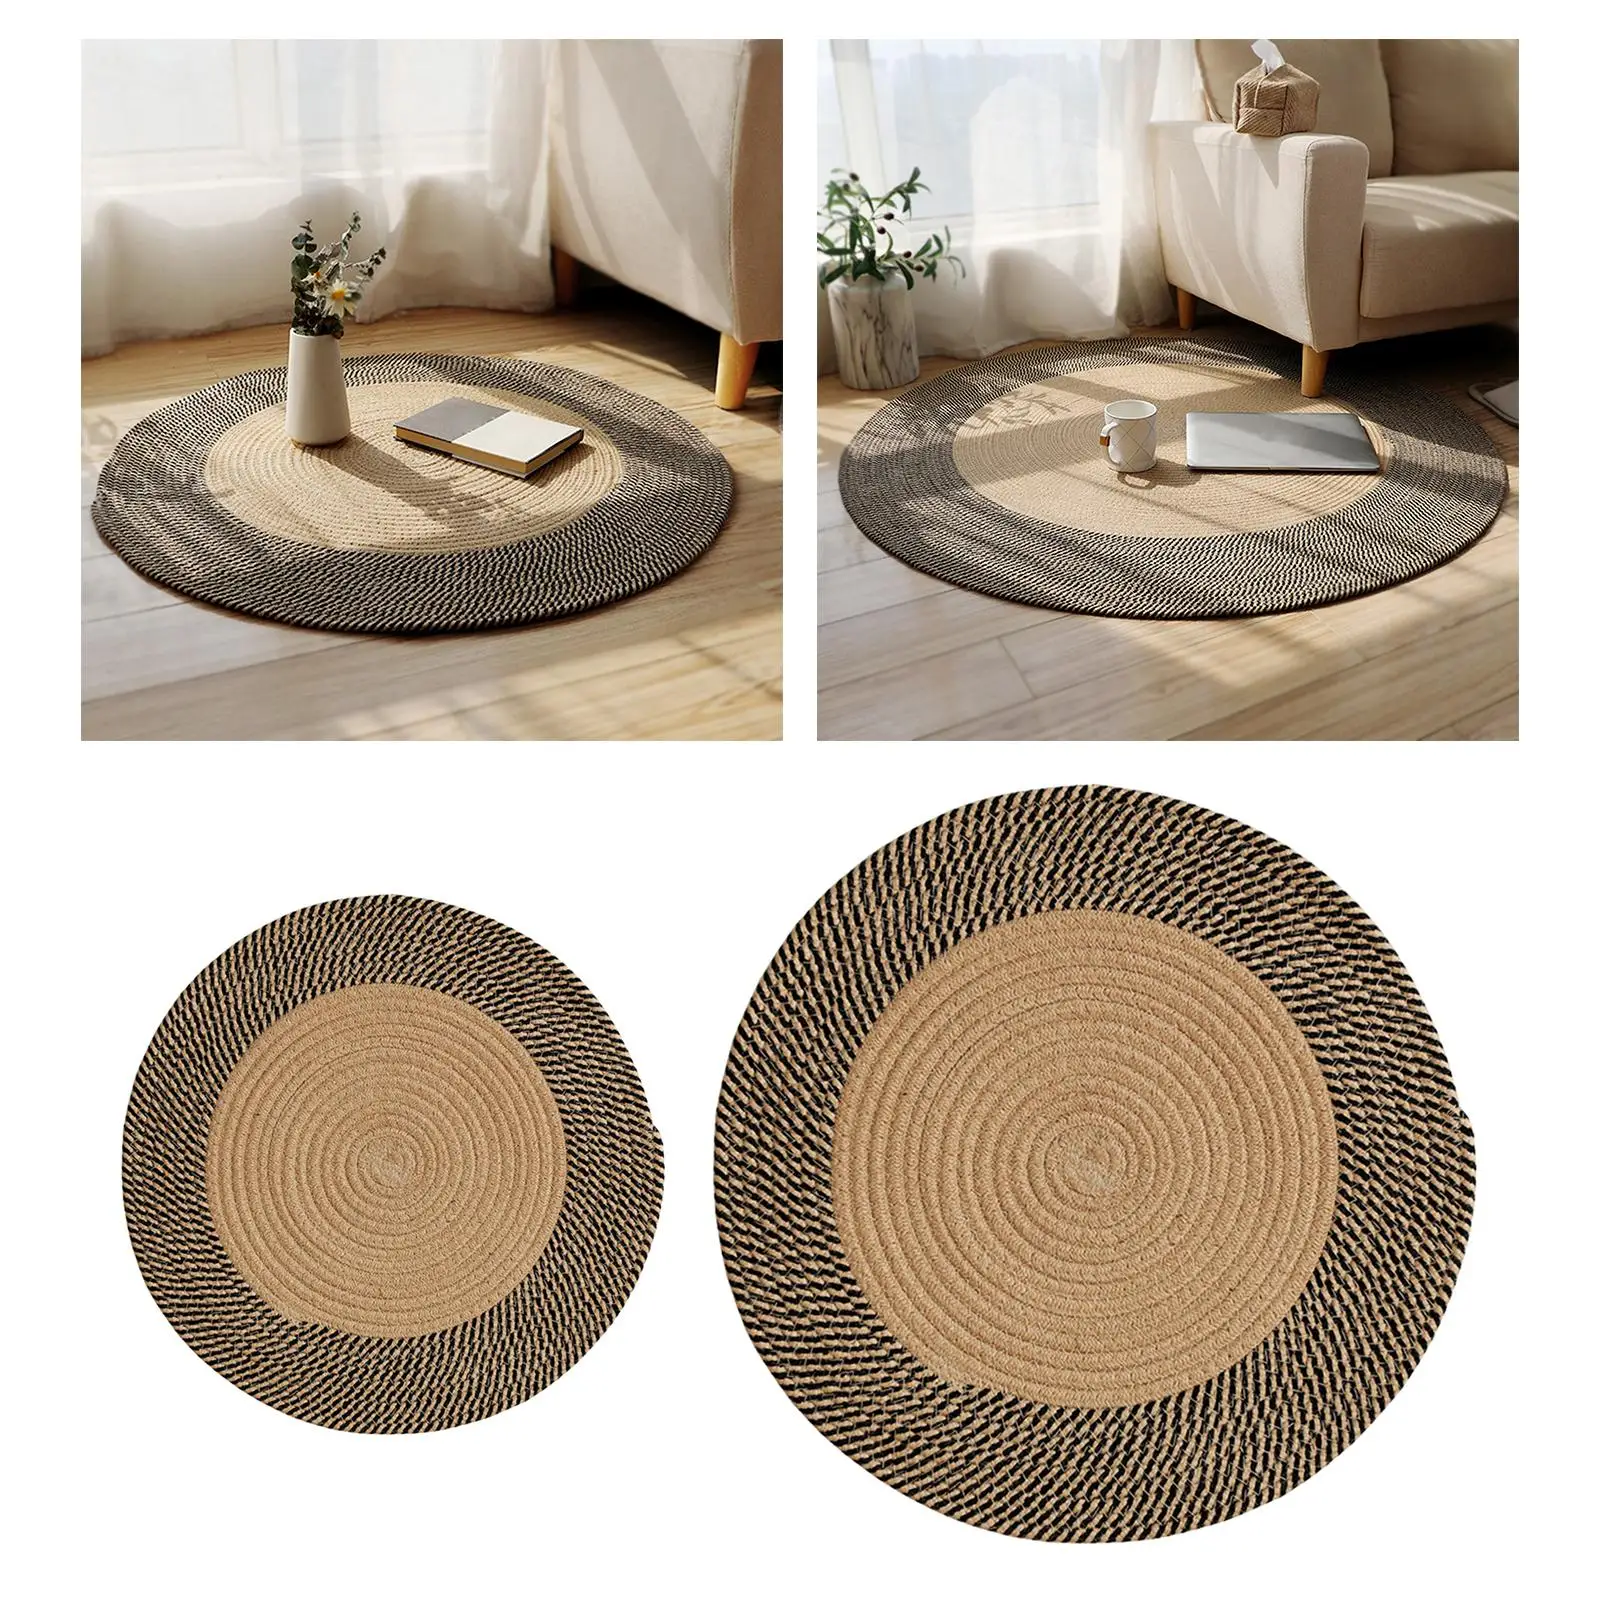 Round Handwoven Natural Jute Braided Rug Farmhouse Rug Reversible Area Rugs for Living Room